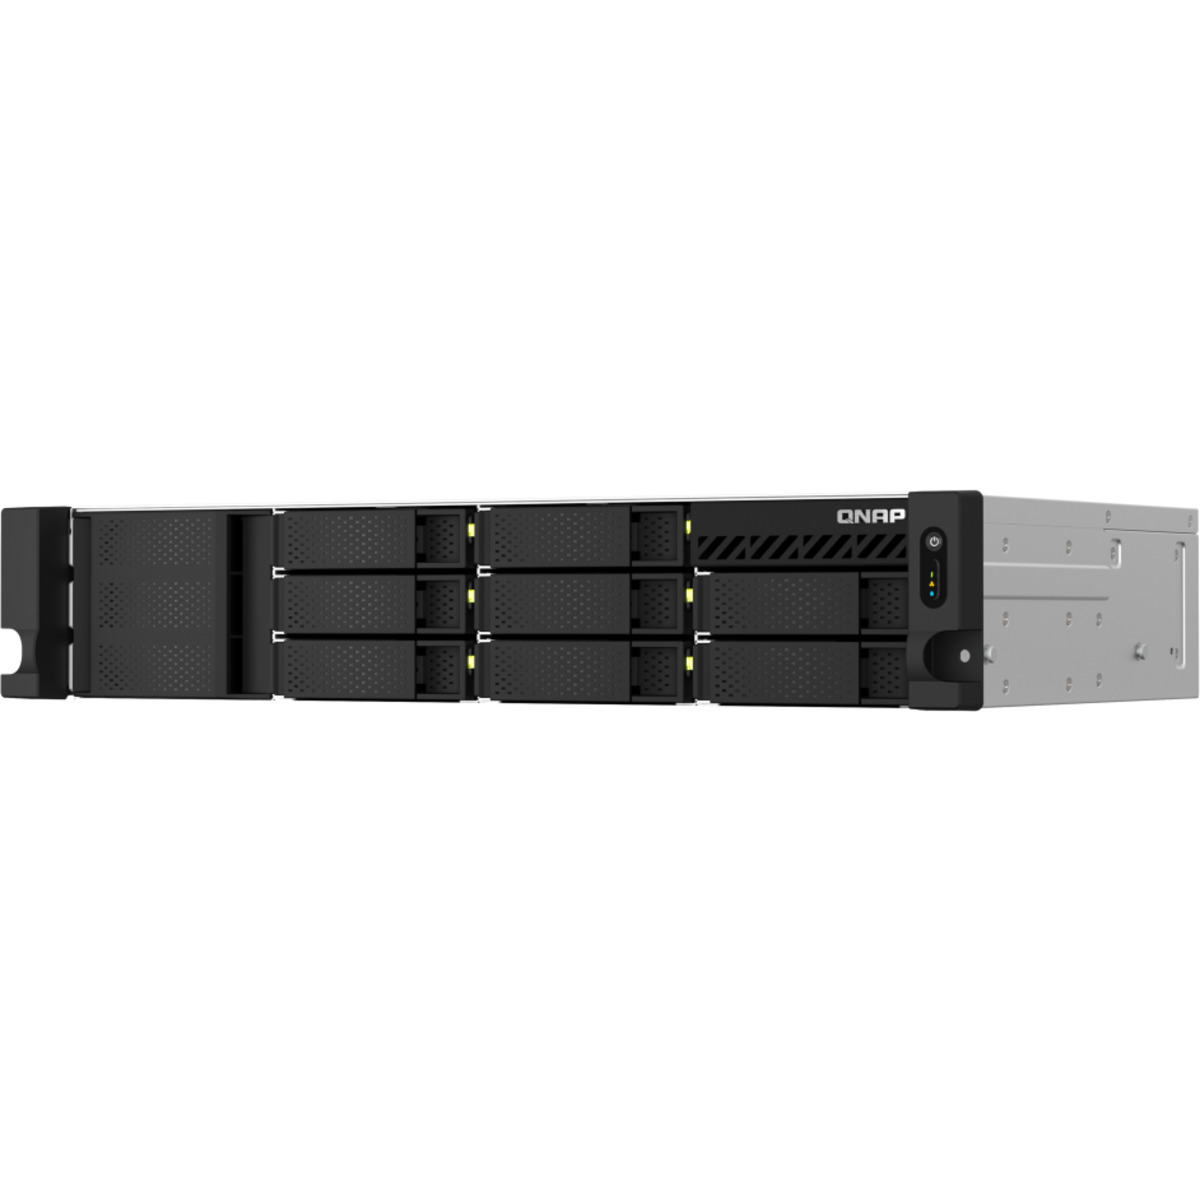 QNAP TS-864eU-RP 10tb 8-Bay RackMount Multimedia / Power User / Business NAS - Network Attached Storage Device 5x2tb Western Digital Gold WD2005FBYZ 3.5 7200rpm SATA 6Gb/s HDD ENTERPRISE Class Drives Installed - Burn-In Tested TS-864eU-RP